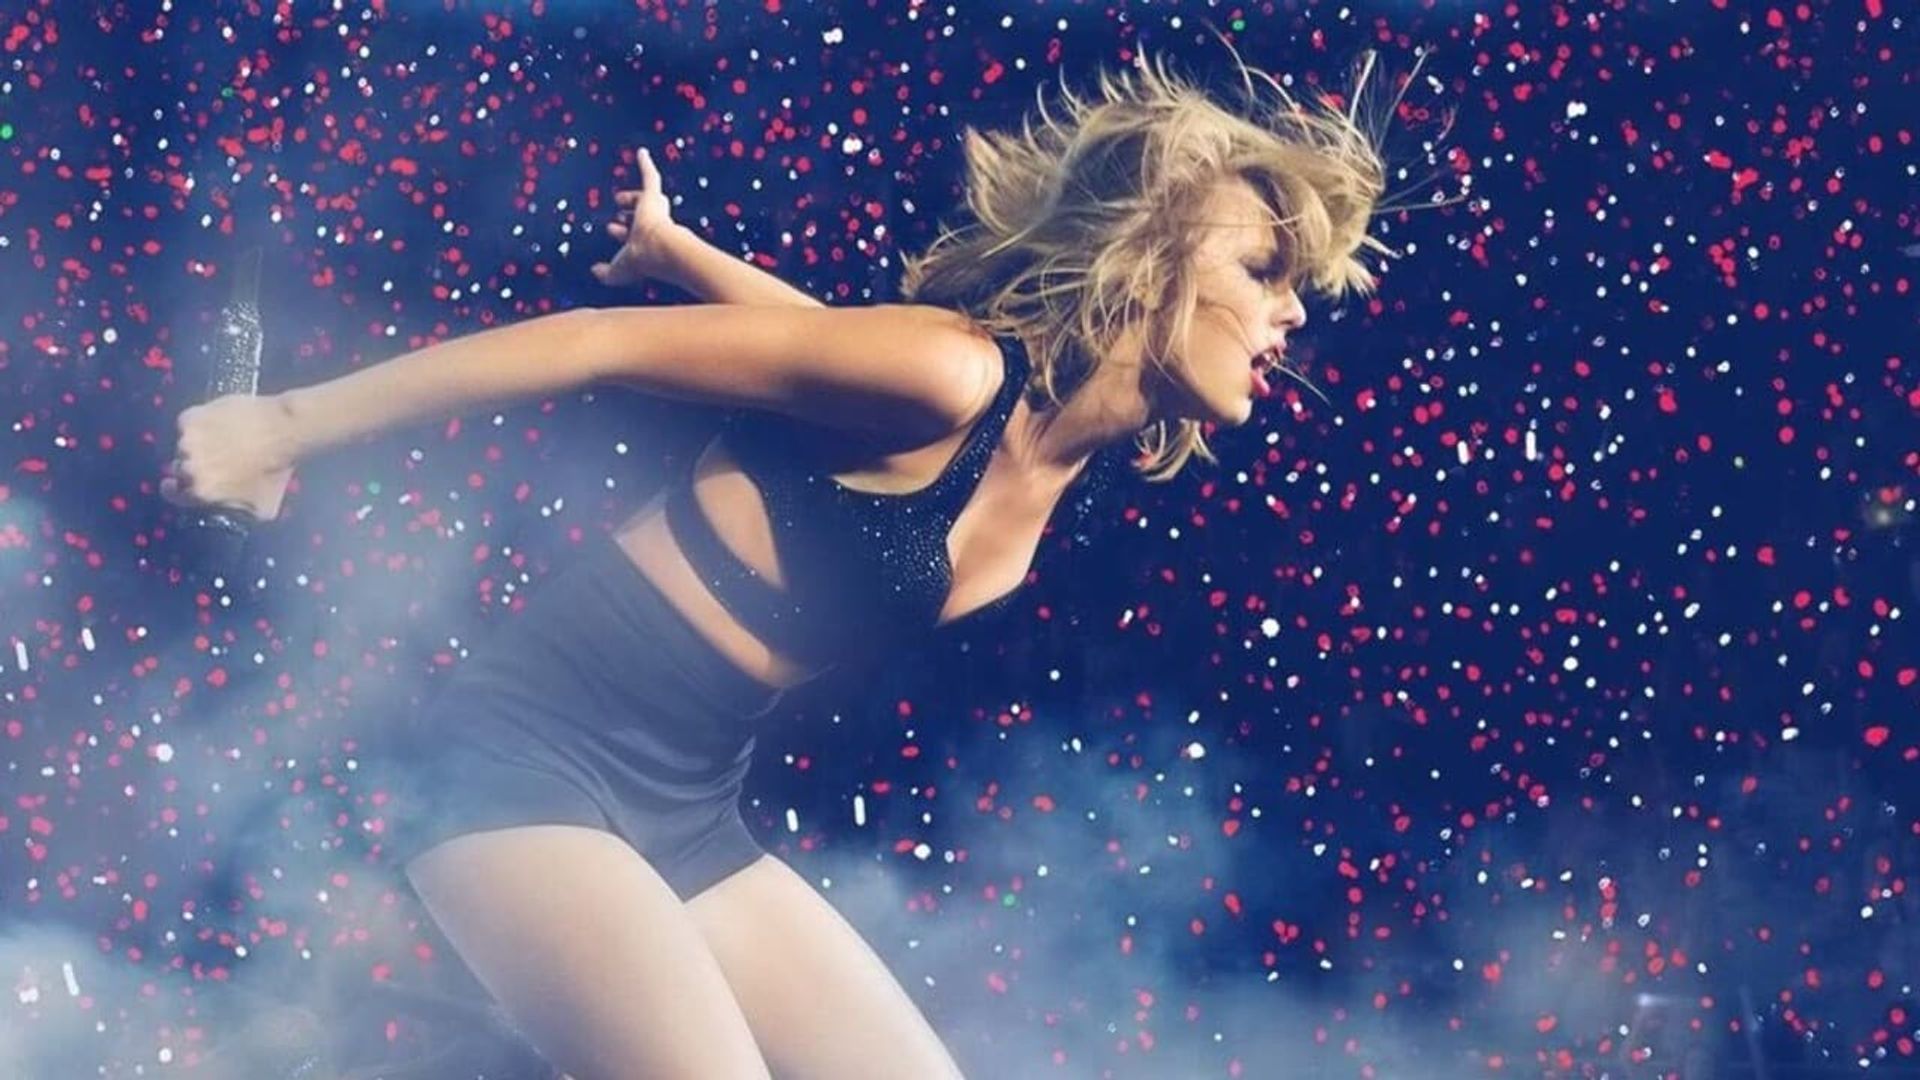 Taylor Swift: The 1989 World Tour Live background